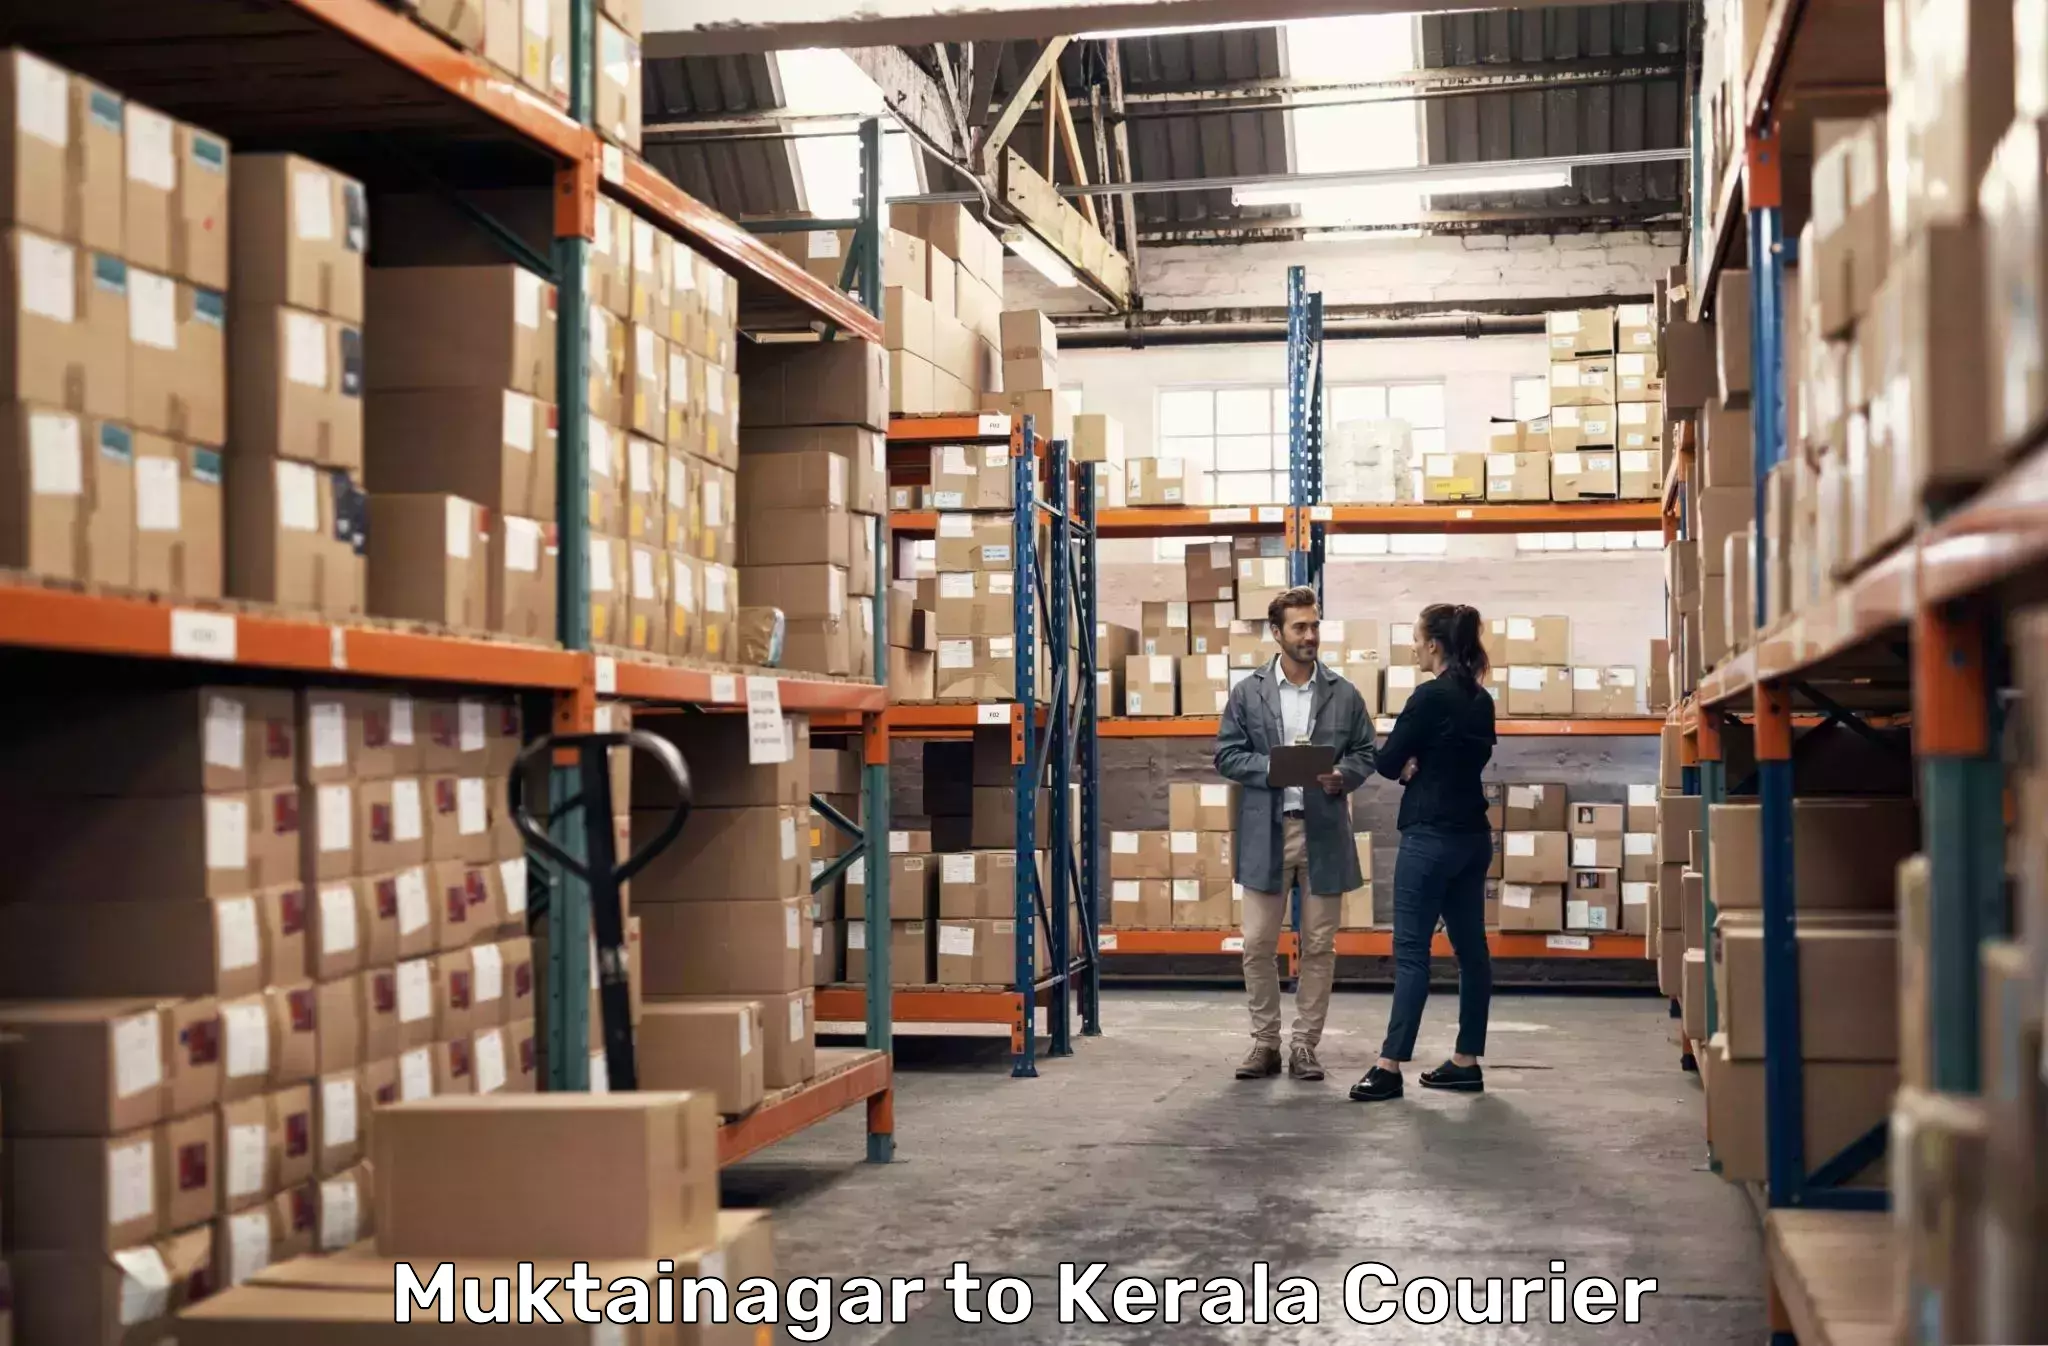 Cash on delivery service Muktainagar to Kerala